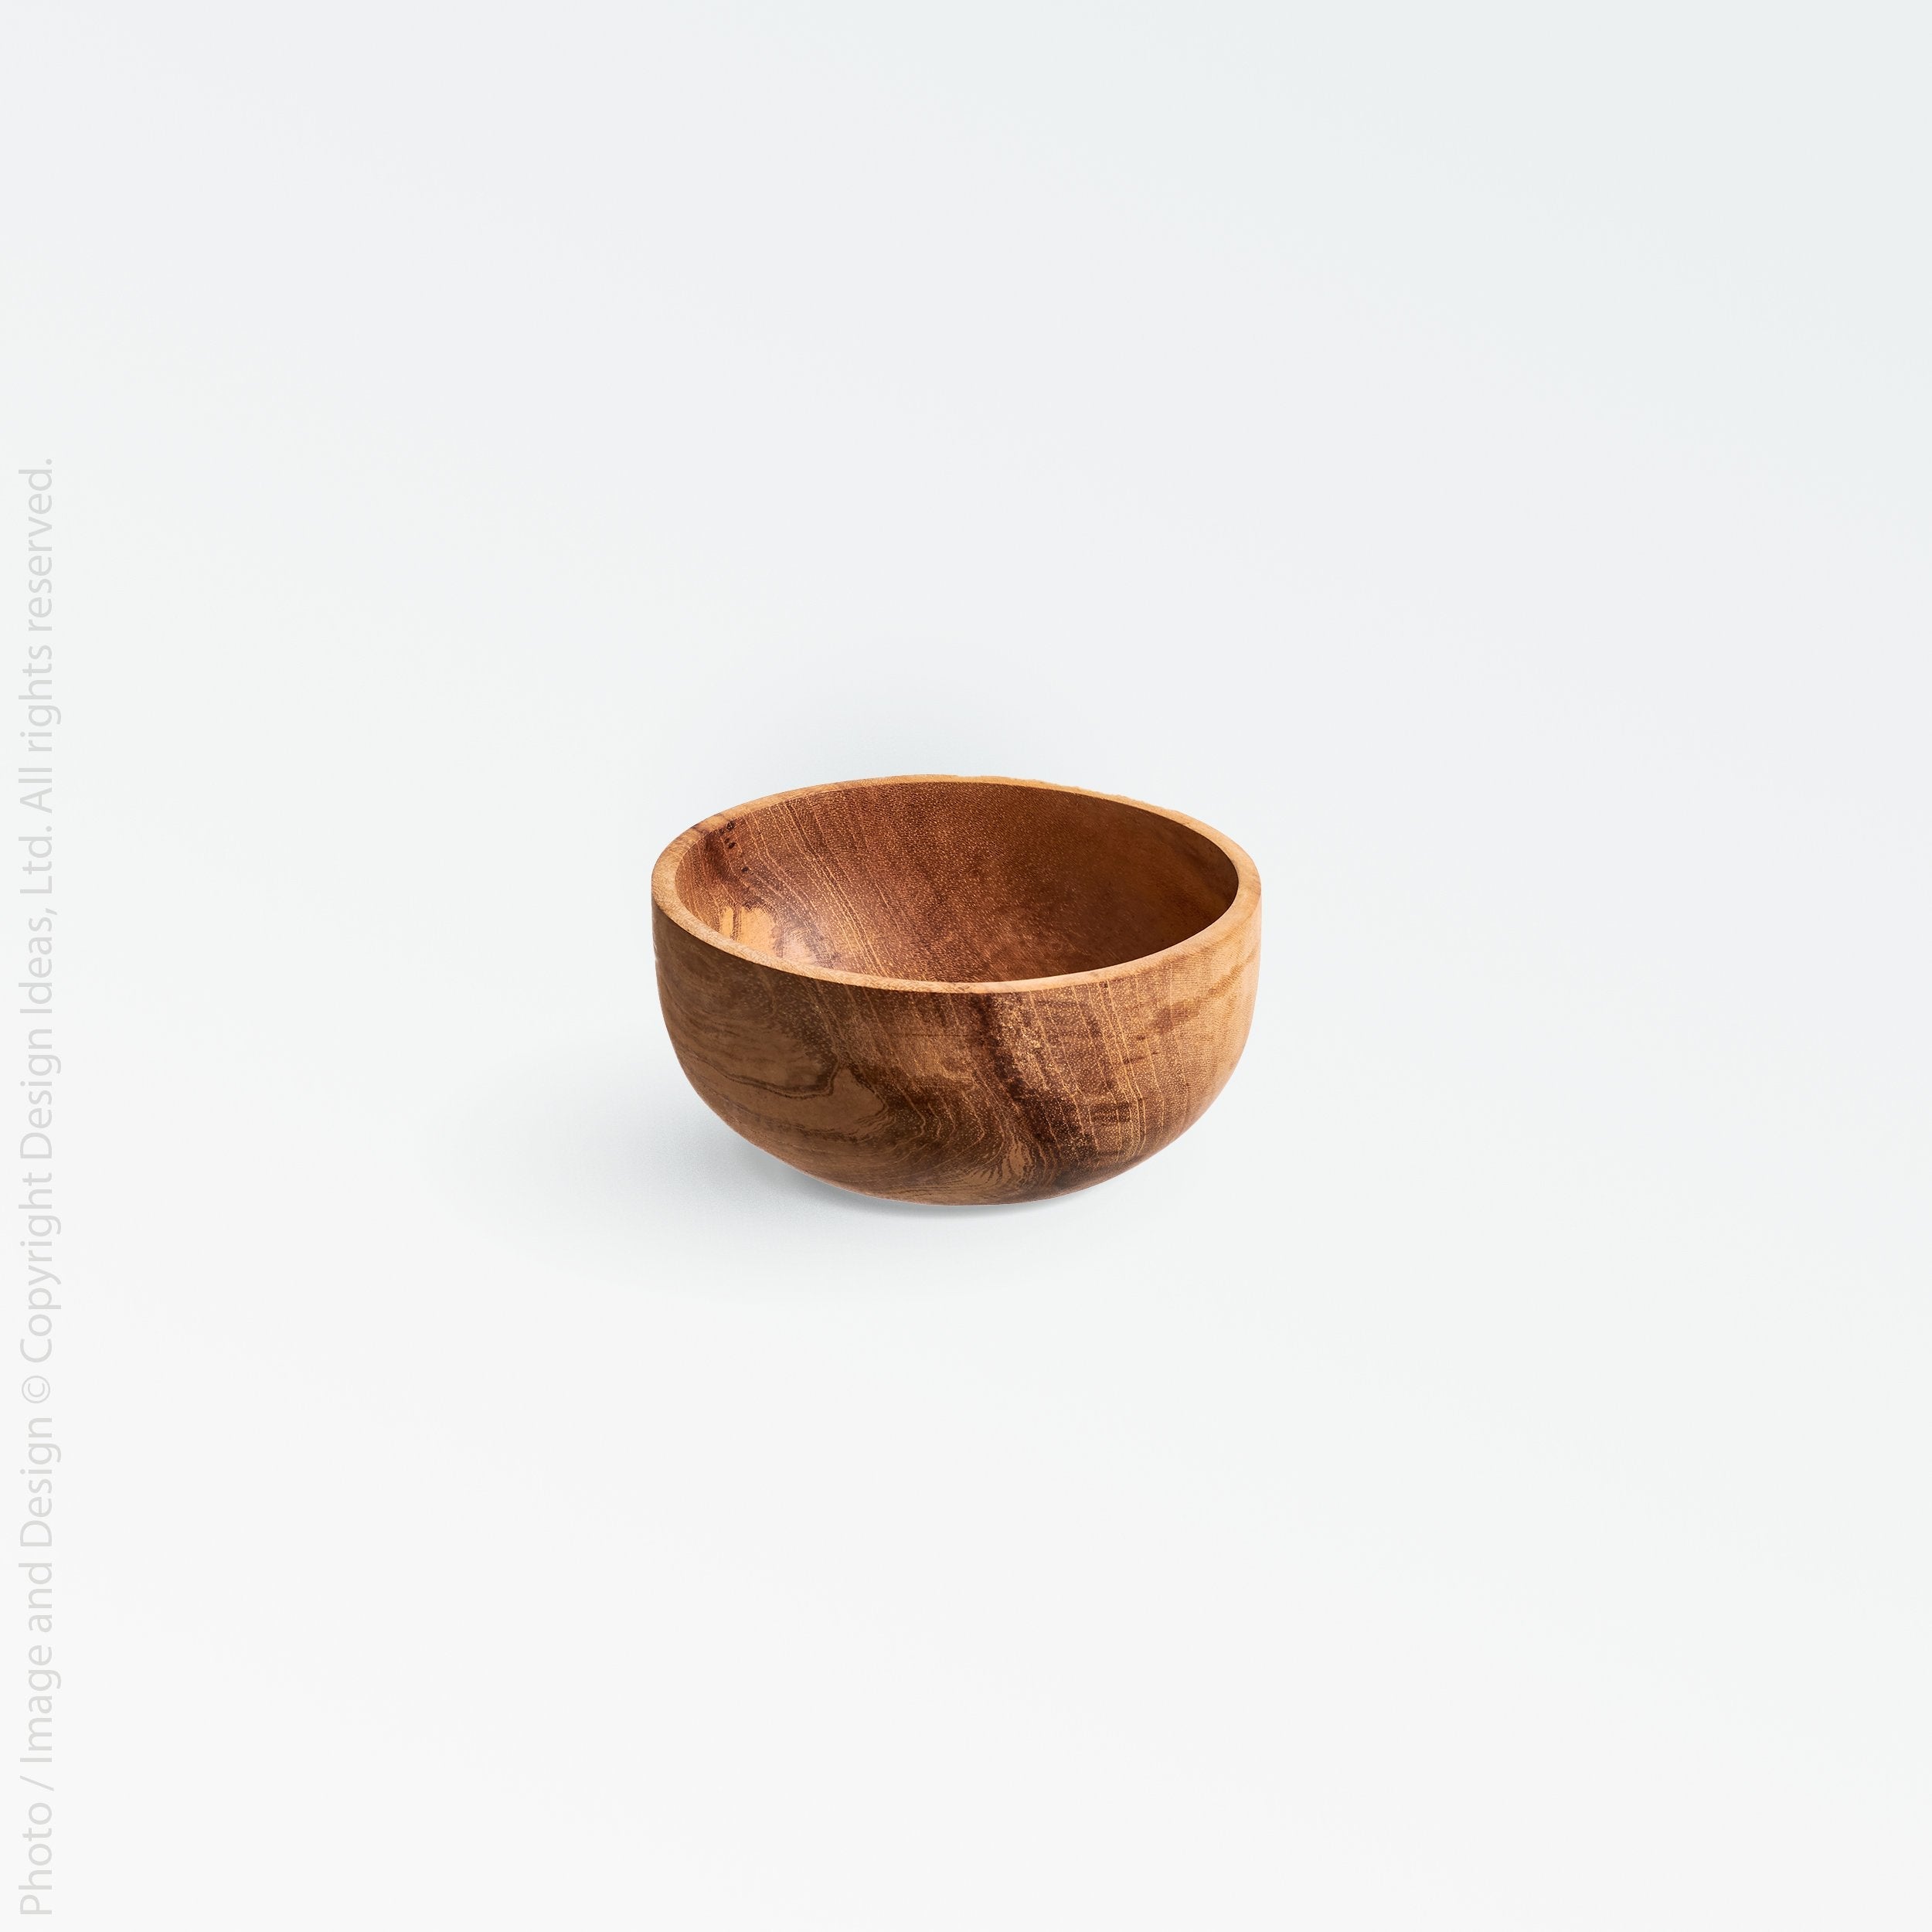 Chiku Teak Bowl (4 Inch Dia) - Black Color | Image 1 | From the Chiku Collection | Exquisitely constructed with natural teak for long lasting use | This bowl is sustainably sourced | Available in natural color | texxture home